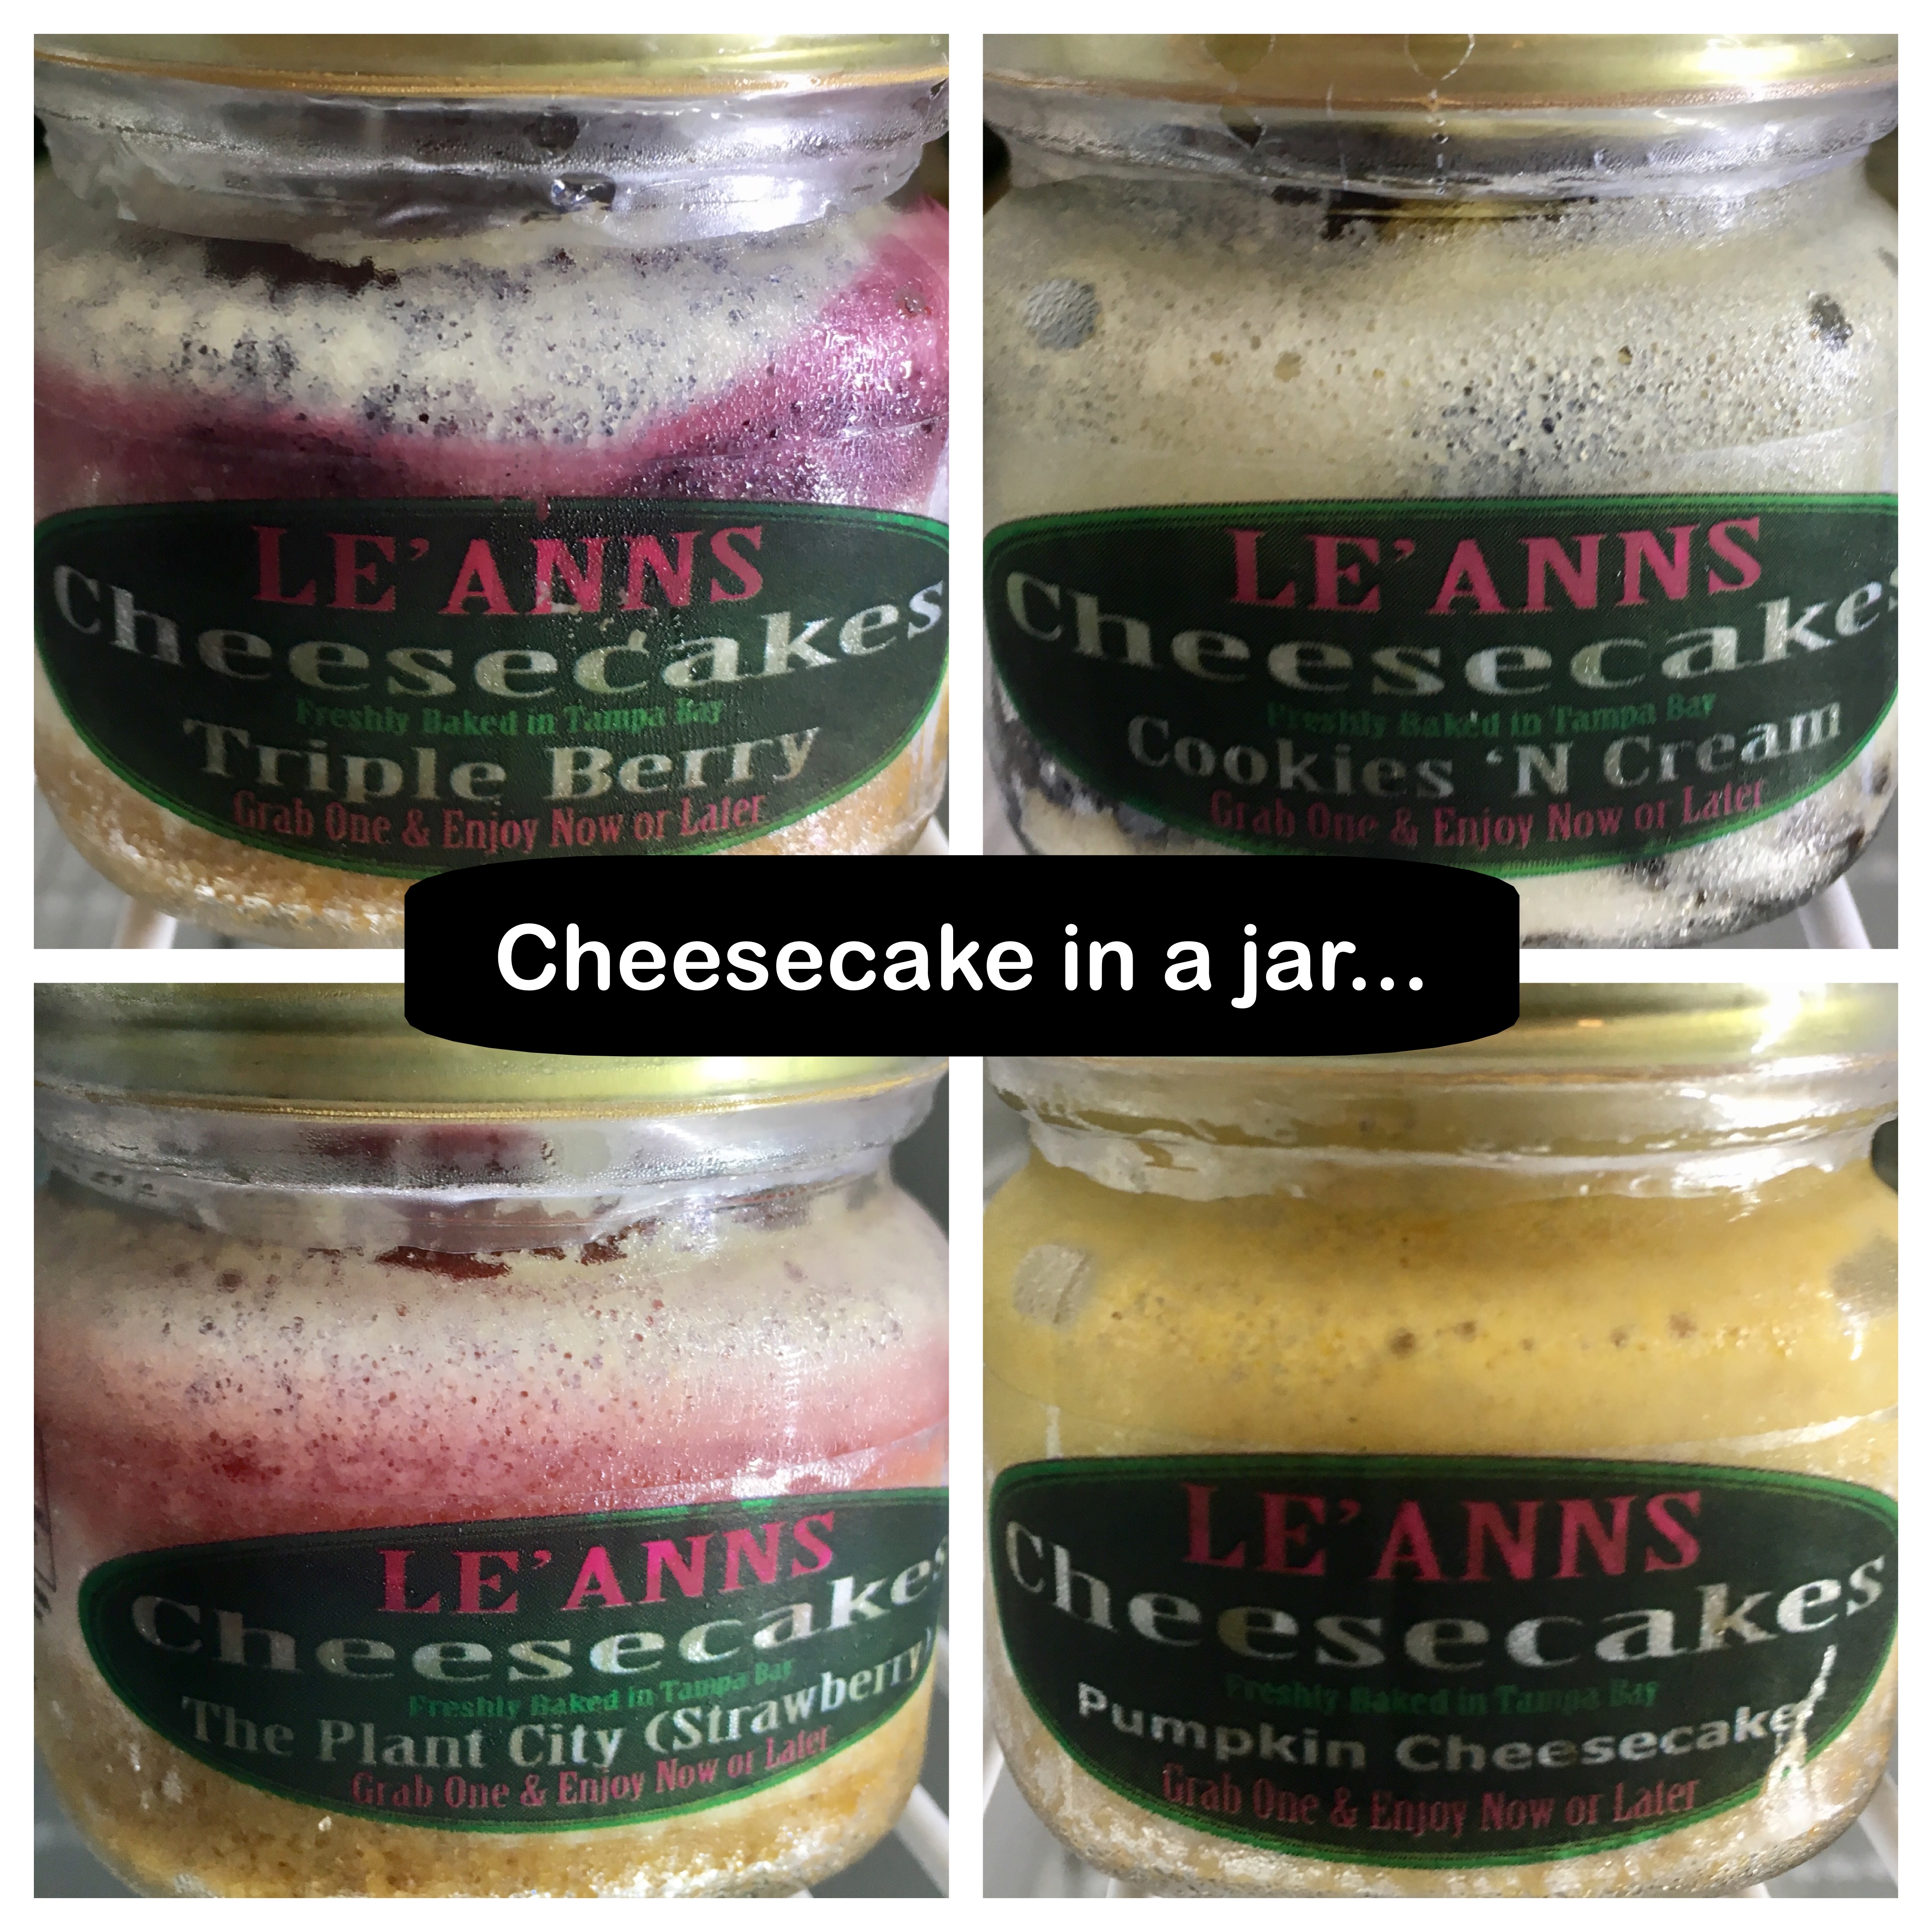 Sugar Shack offers Le' Anns Cheesecakes in a jar